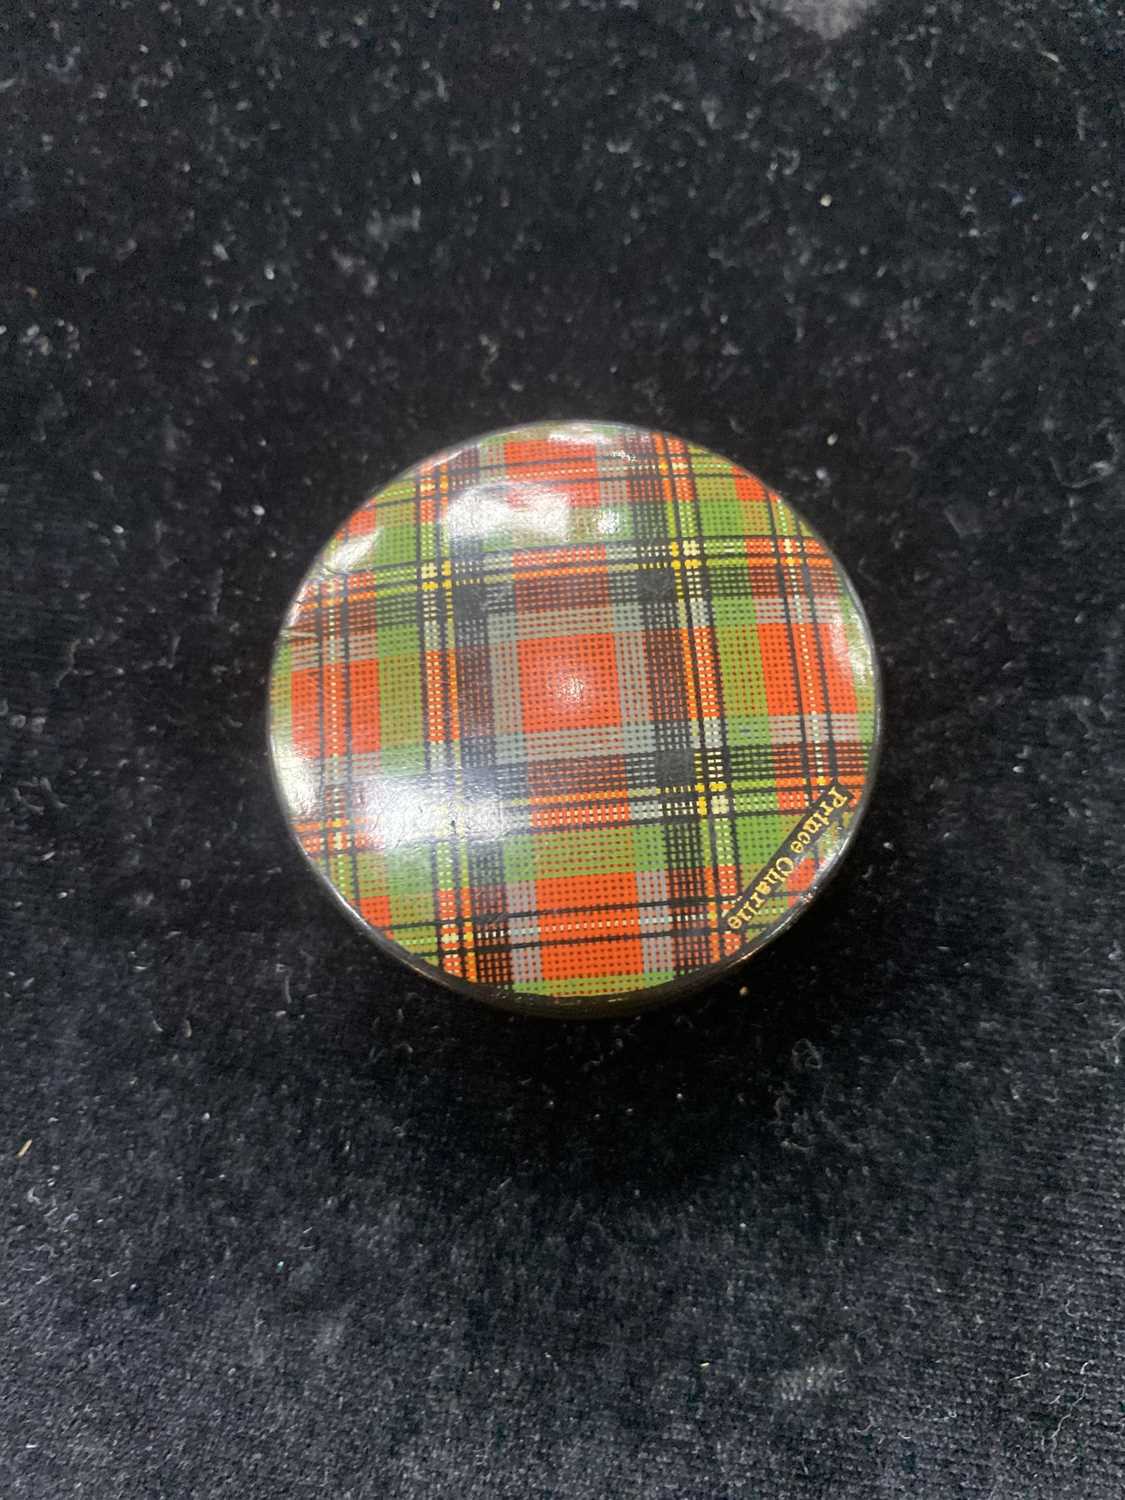 MAUCHLINE ROBERT BURNS BROOCH, ALONG WITH MAUCHLINE BOXES AND NAPKIN RINGS - Image 11 of 15